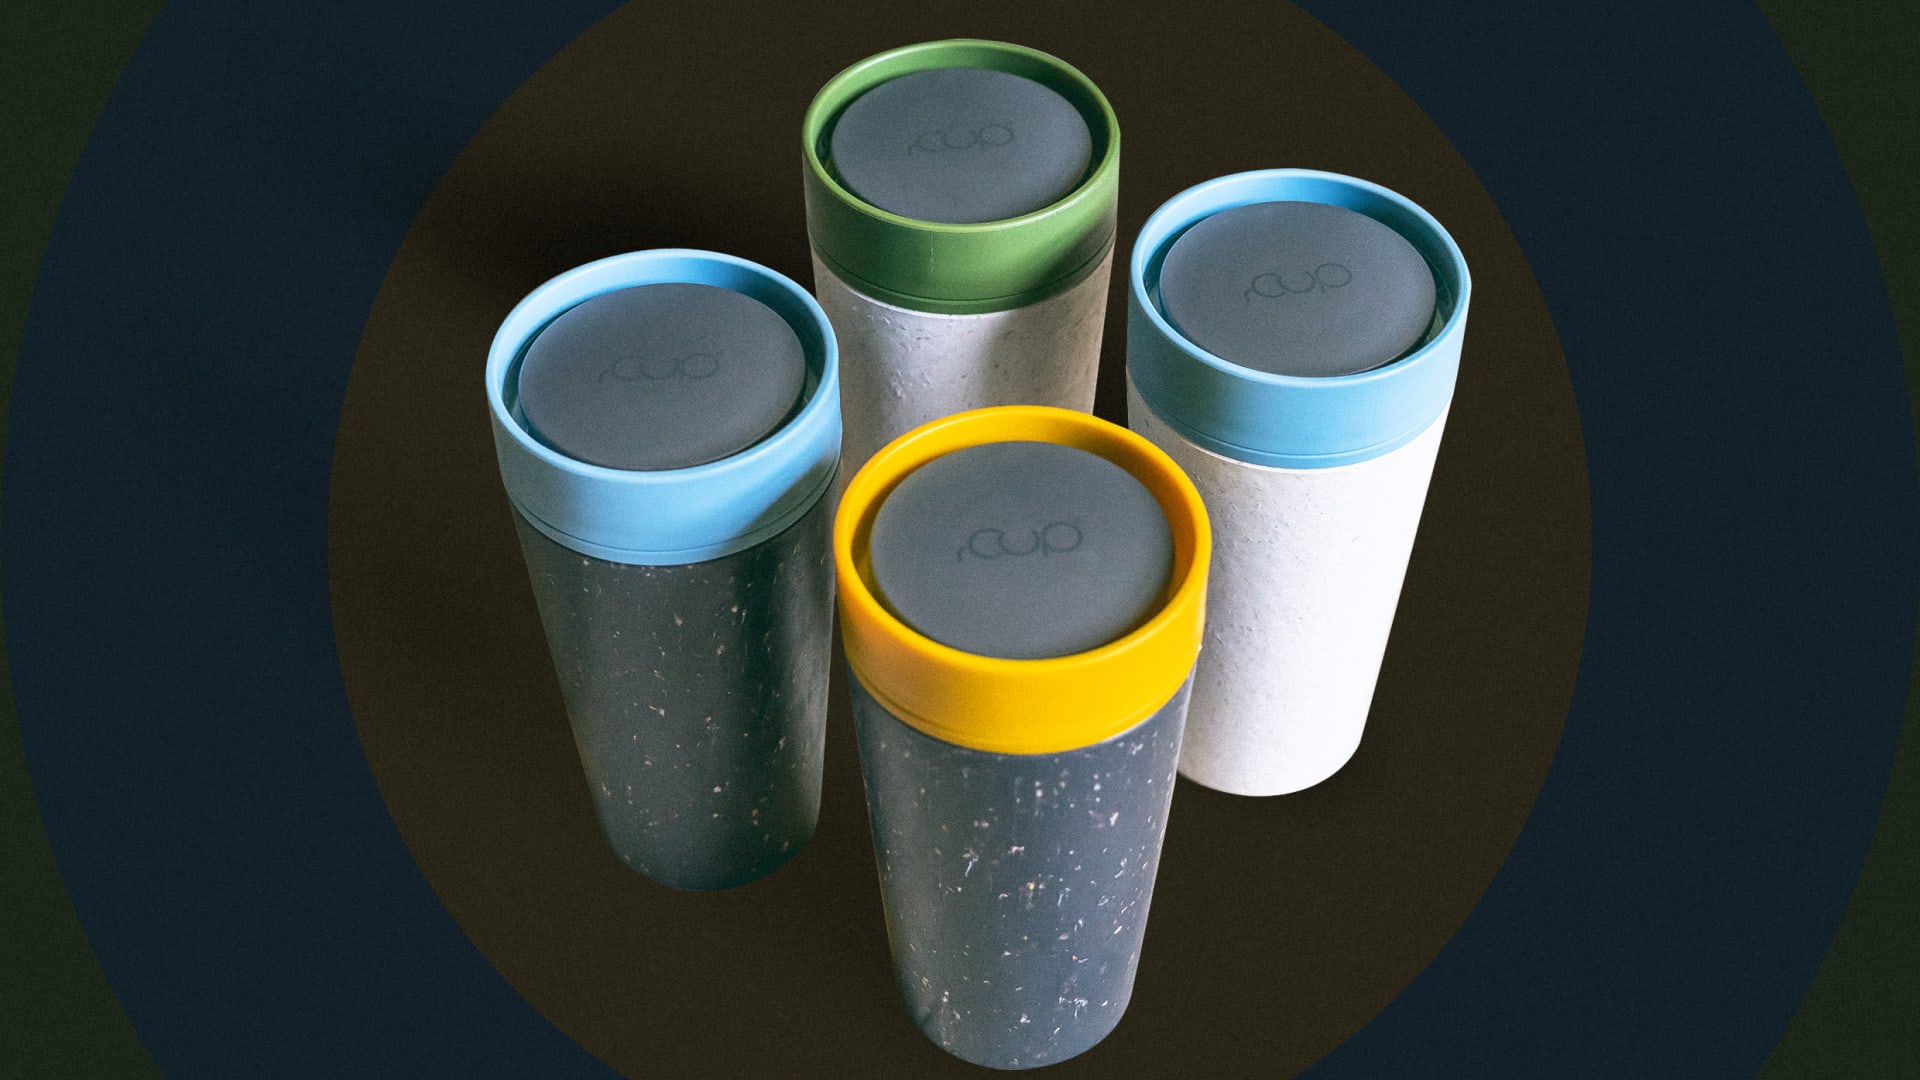 This reusable mug is made from recycled coffee cups